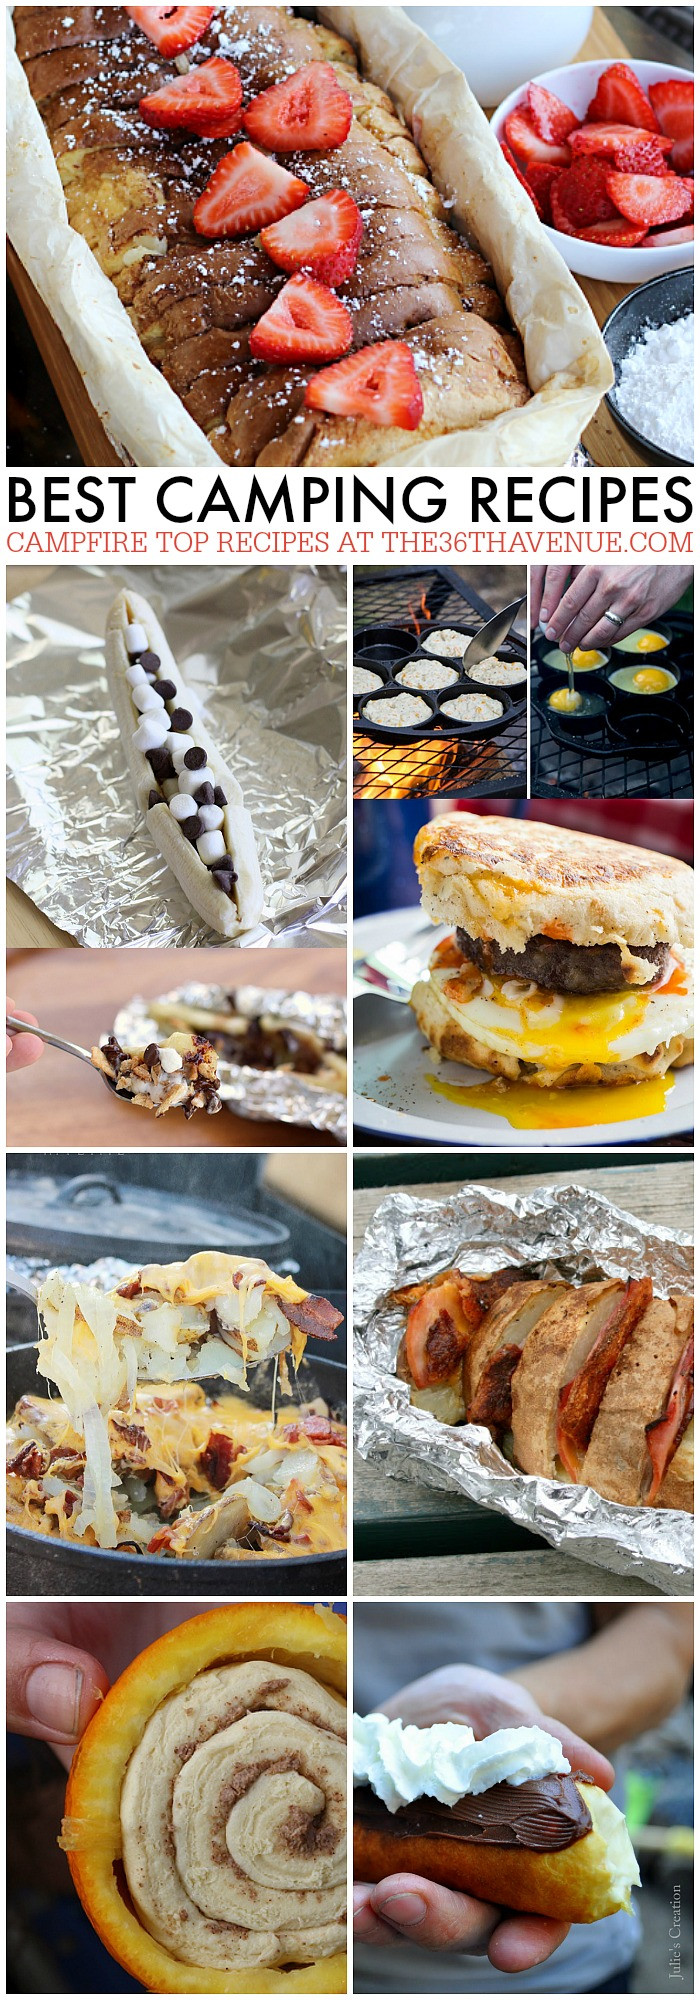 Camping Dinner Recipes
 The 36th AVENUE Best Camping Recipes